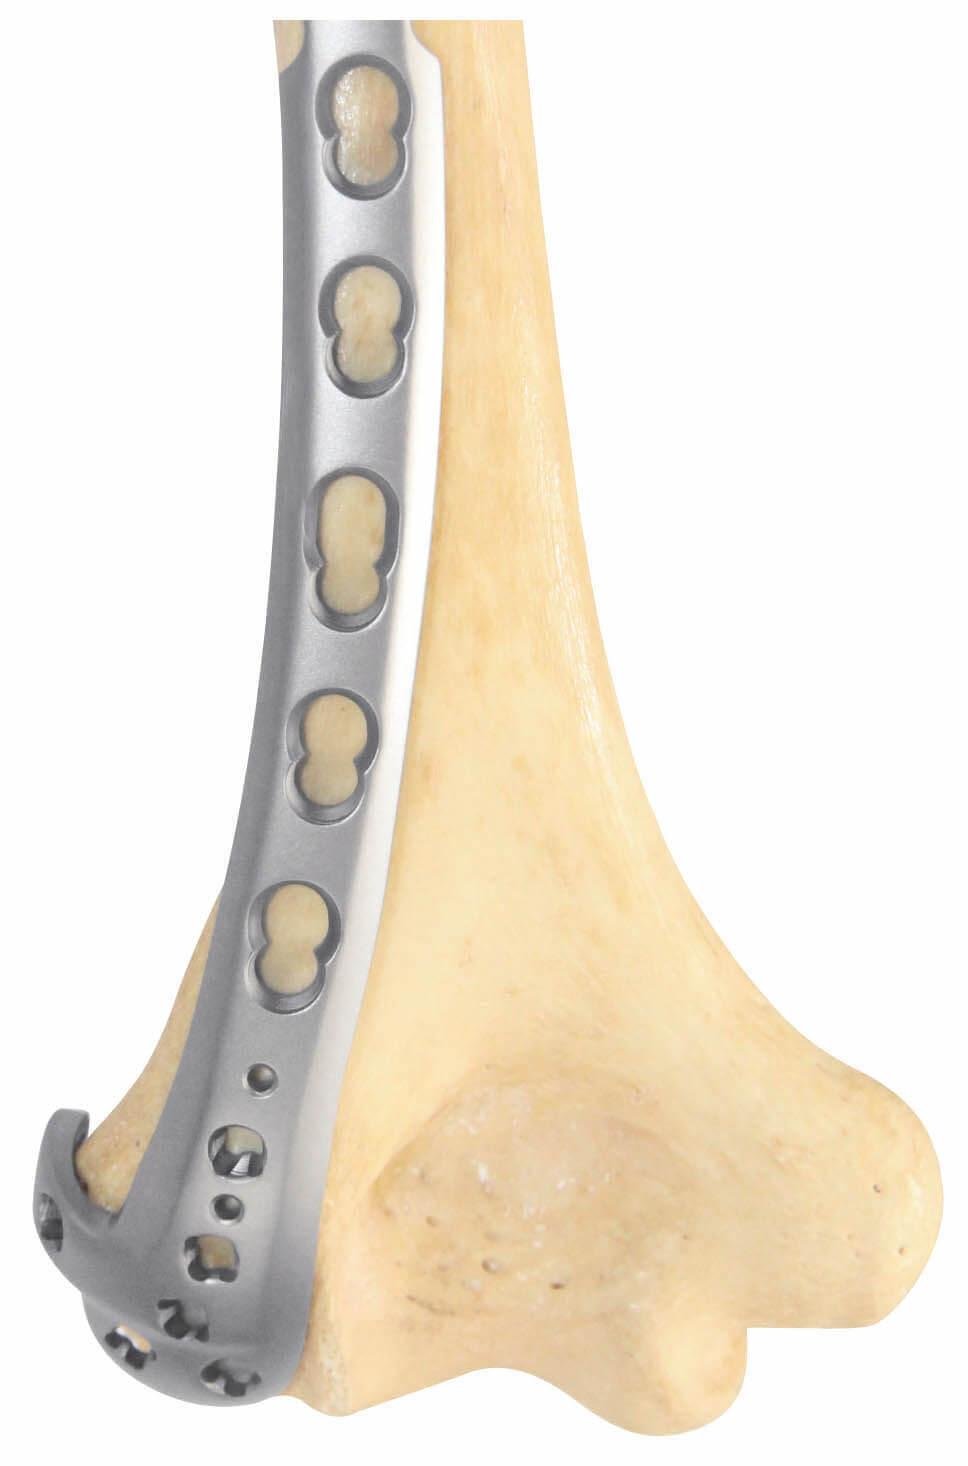 Distal Lateral humeral universal locking plate(L/R)